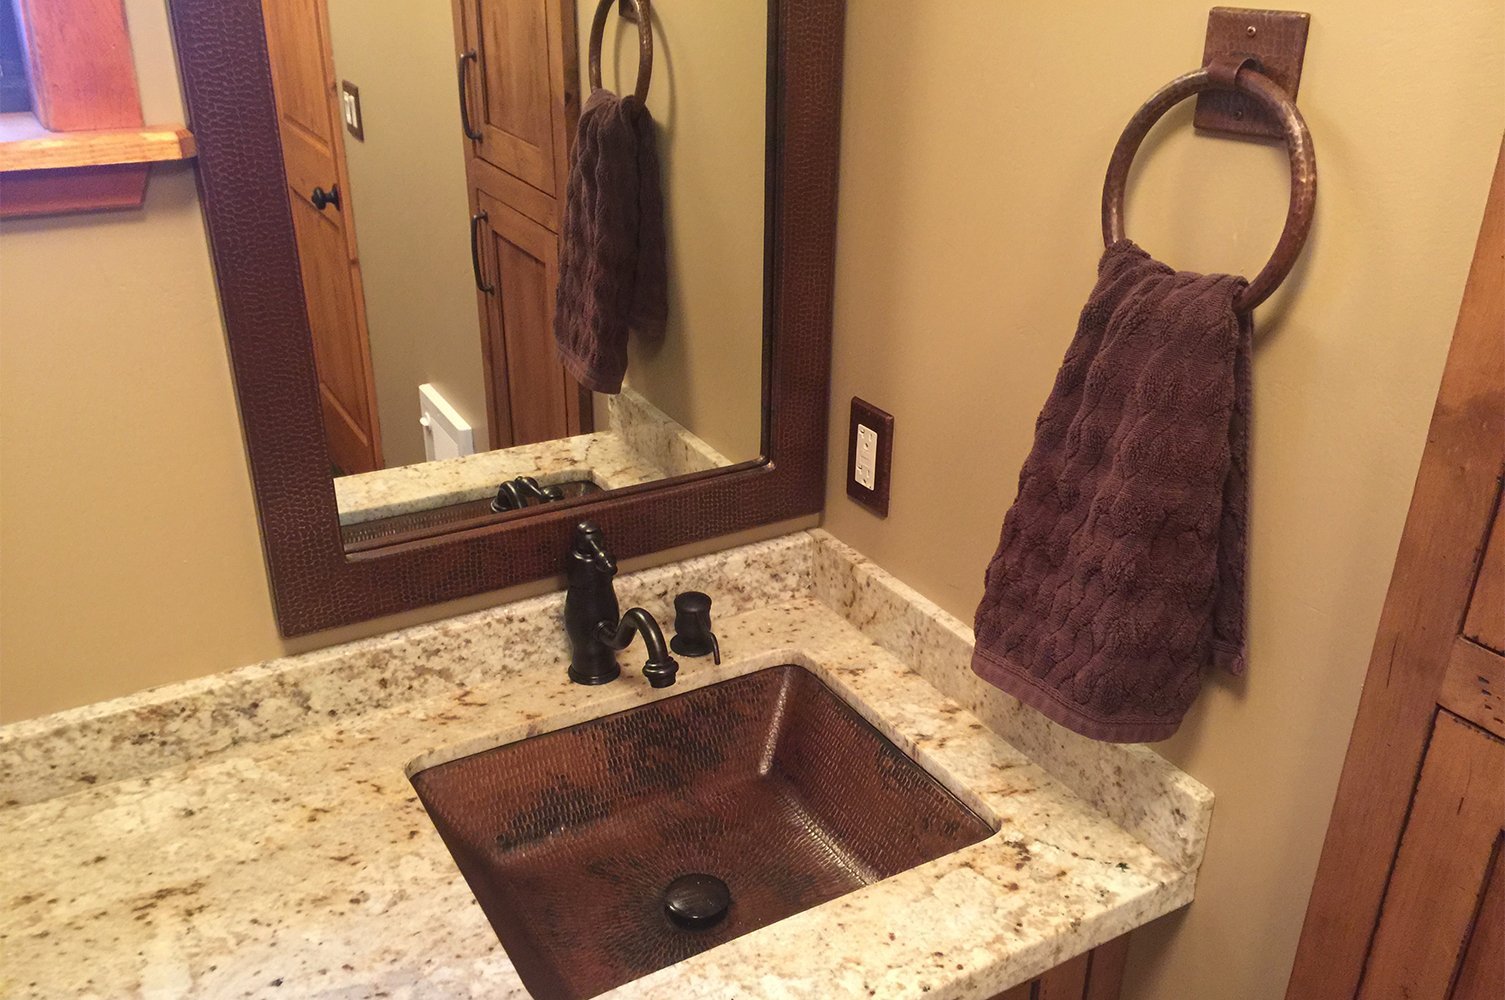 36" Rectangle Hammered Copper Mirror in a farmhouse style bathroom with matching sink